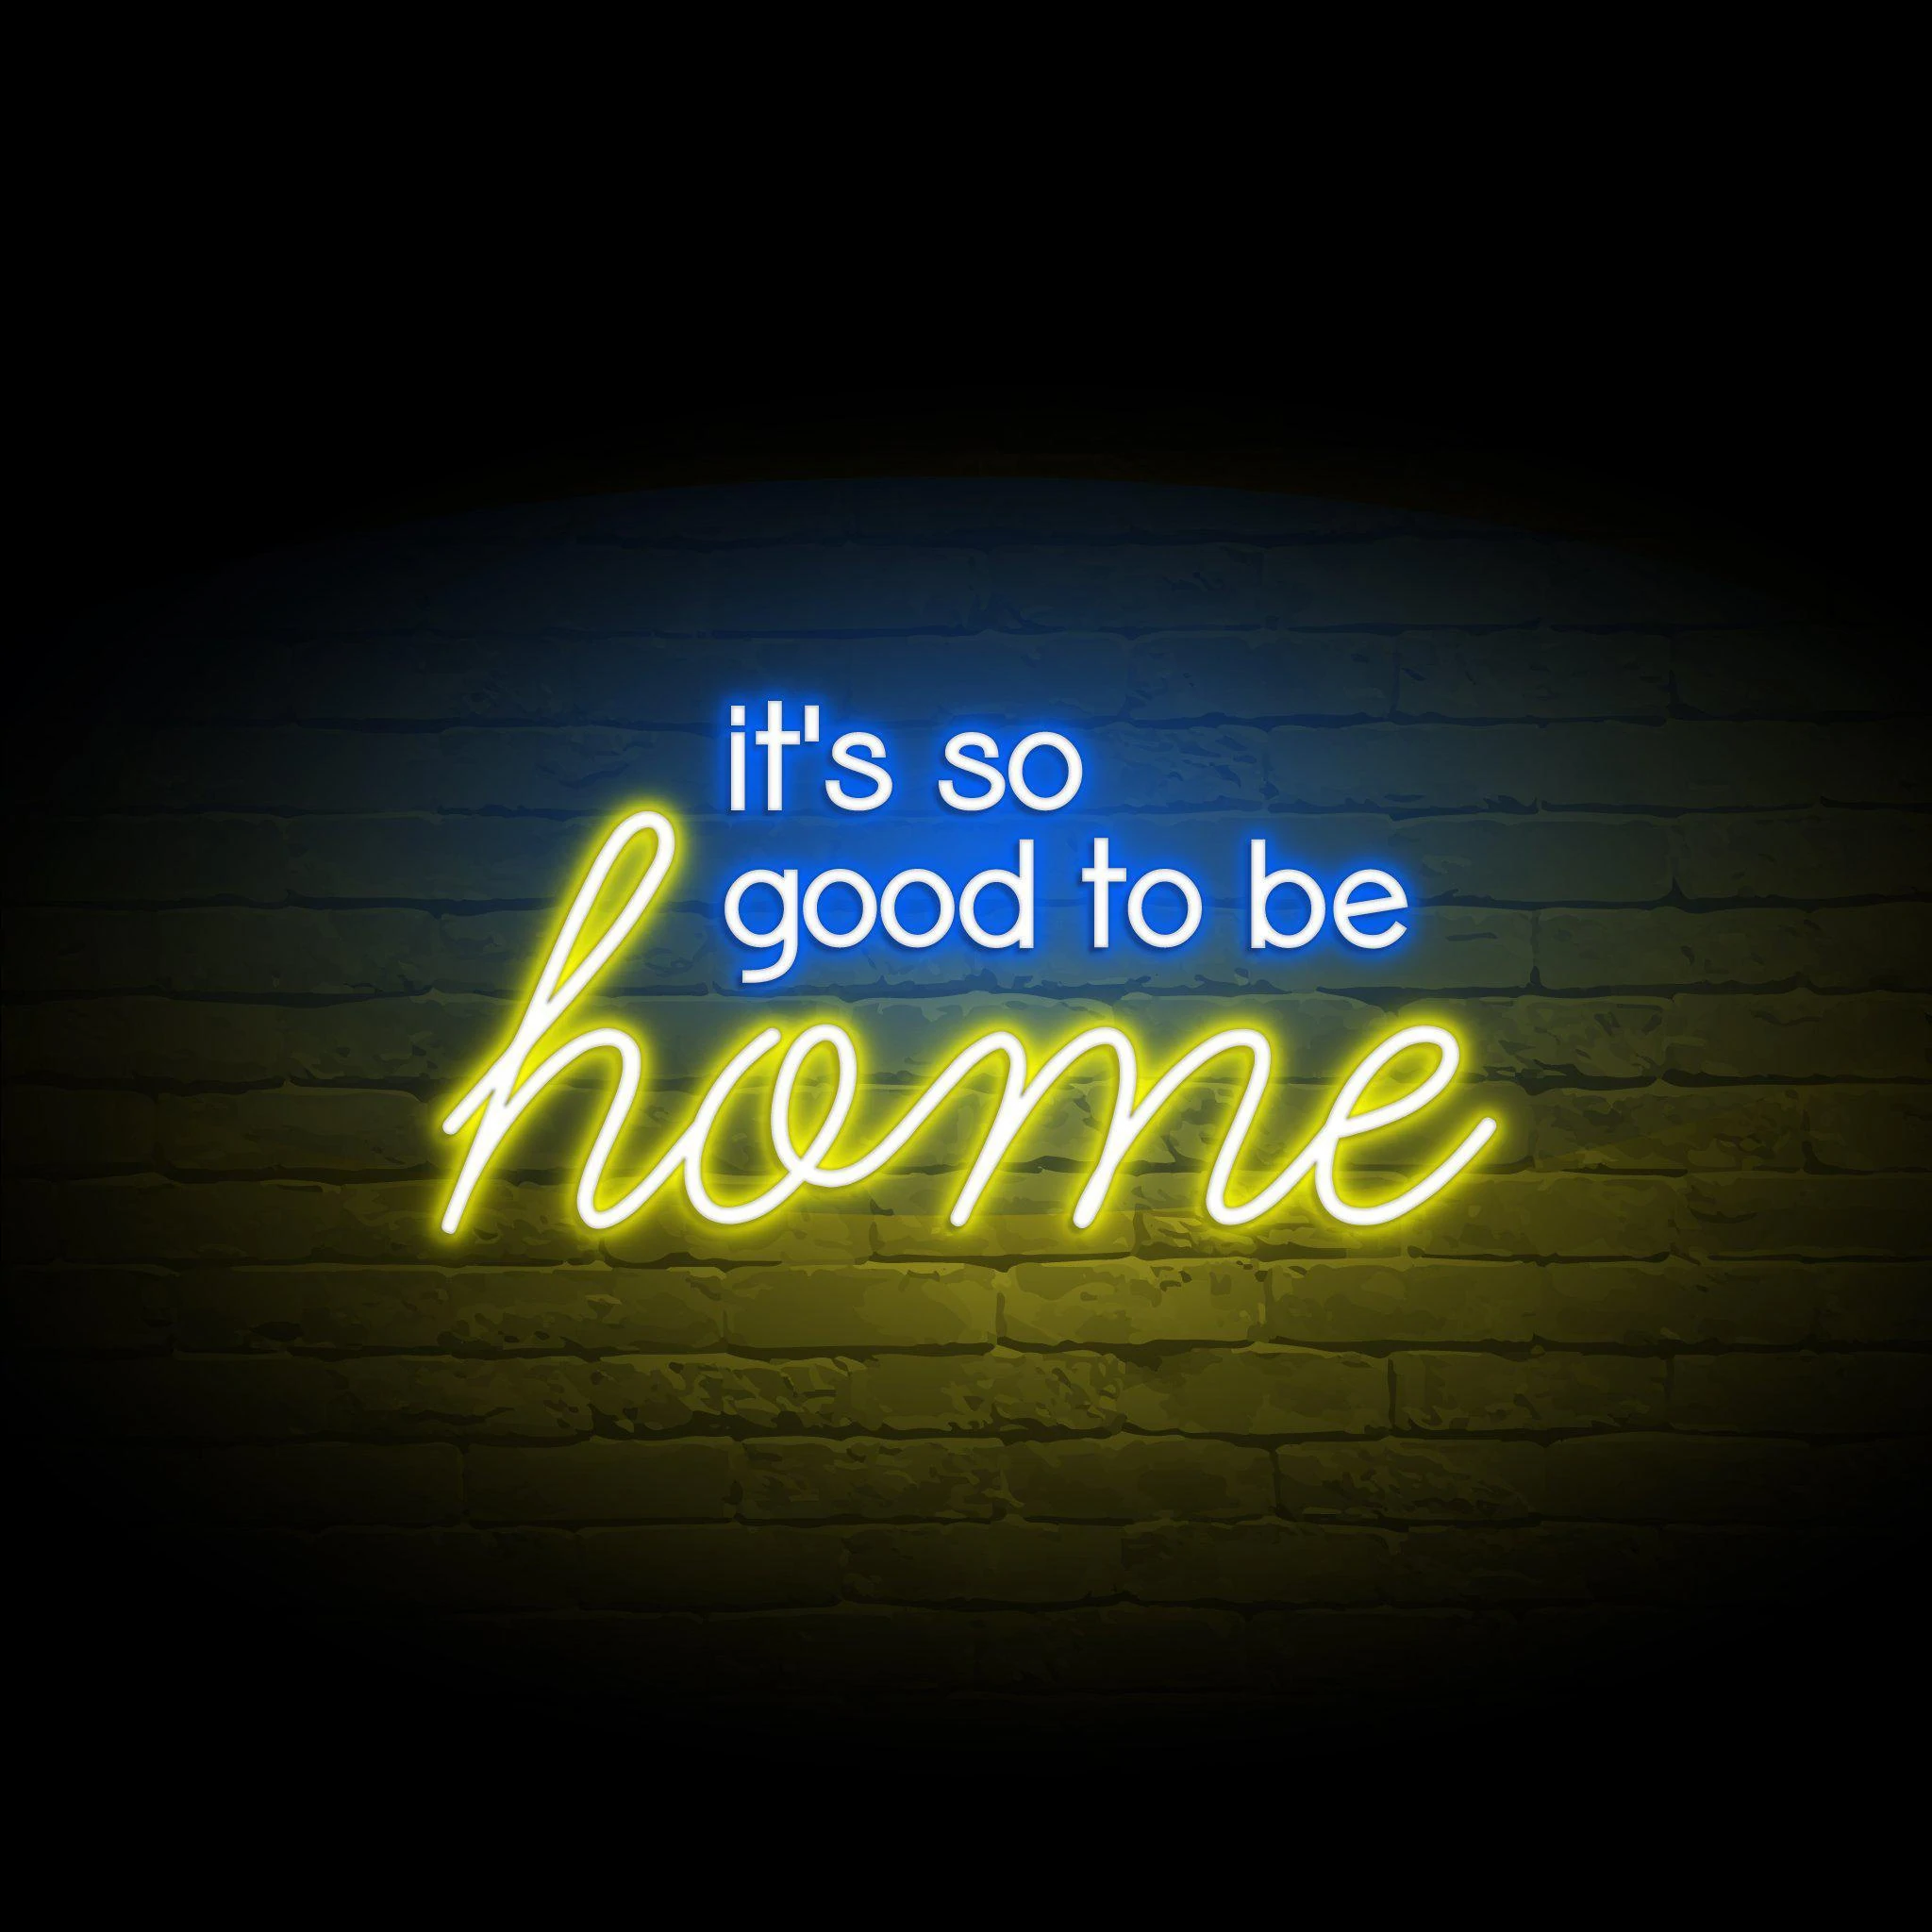 'IT'S SO GOOD TO BE HOME' NEON SIGN